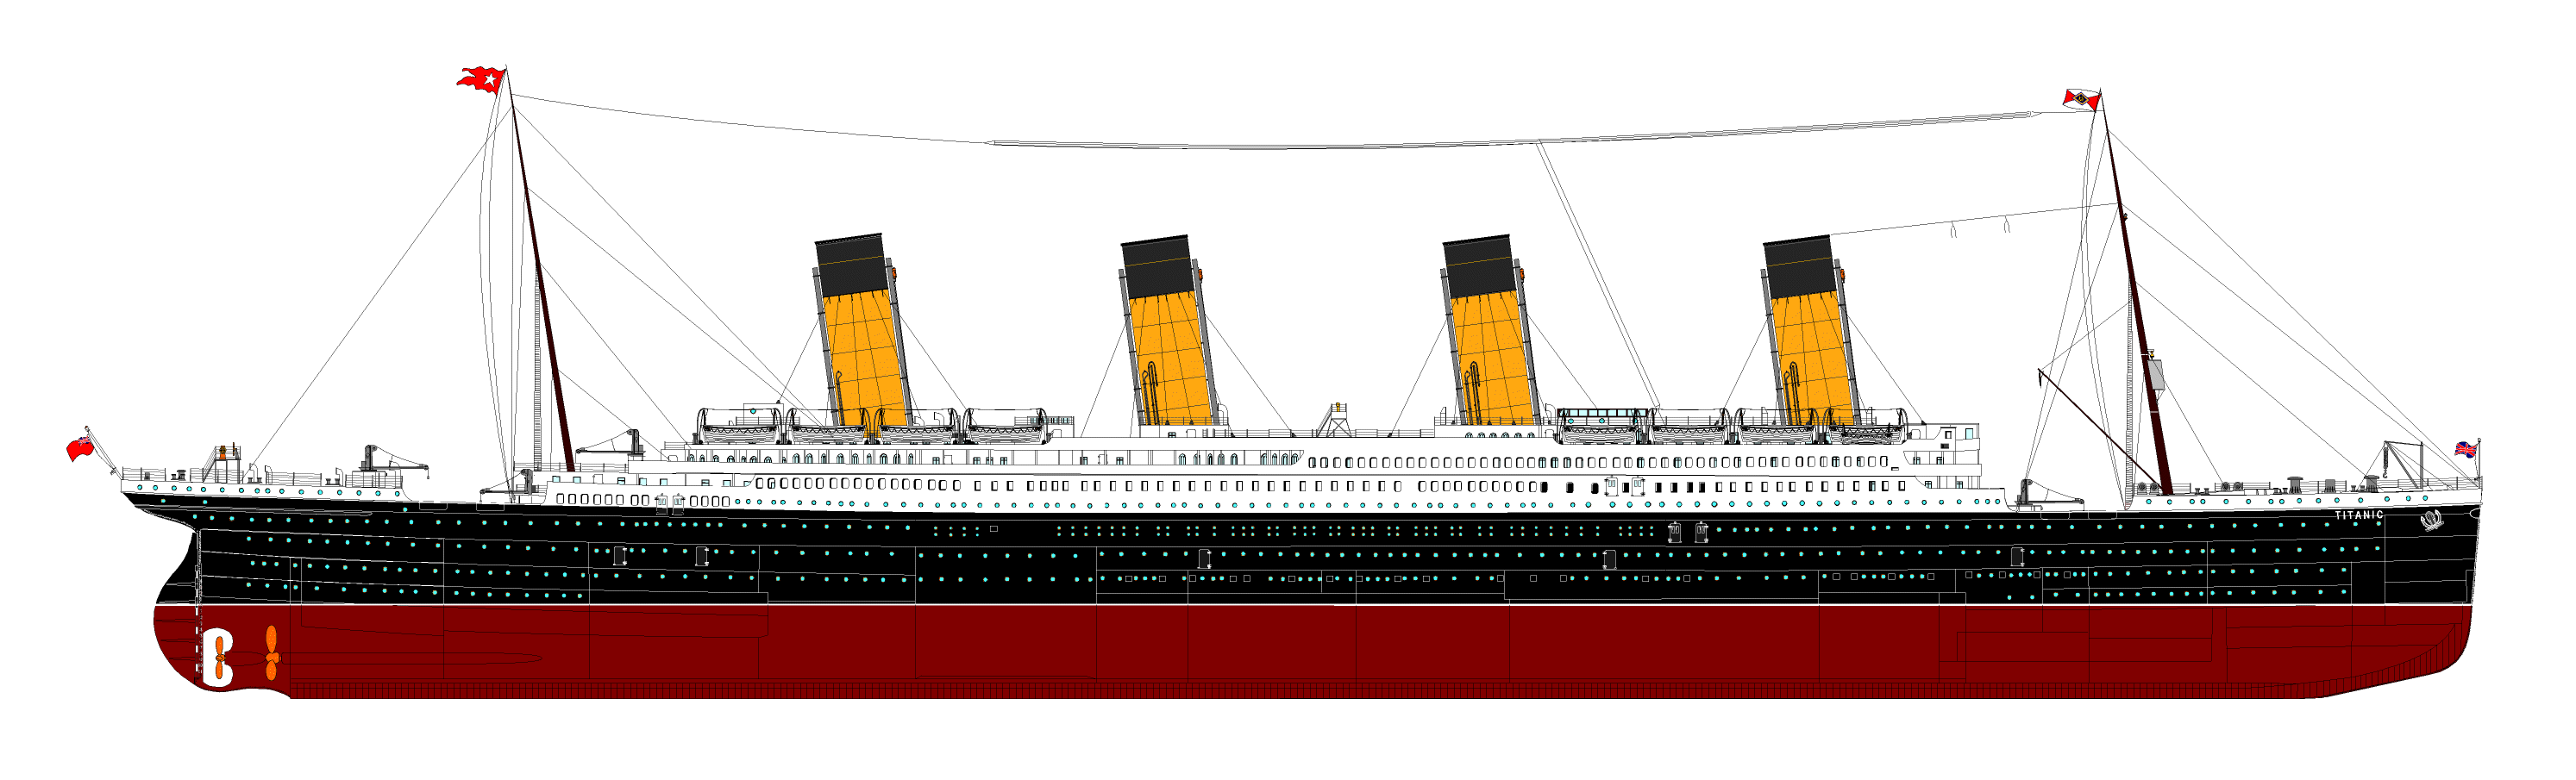 Drawing of the Titanic